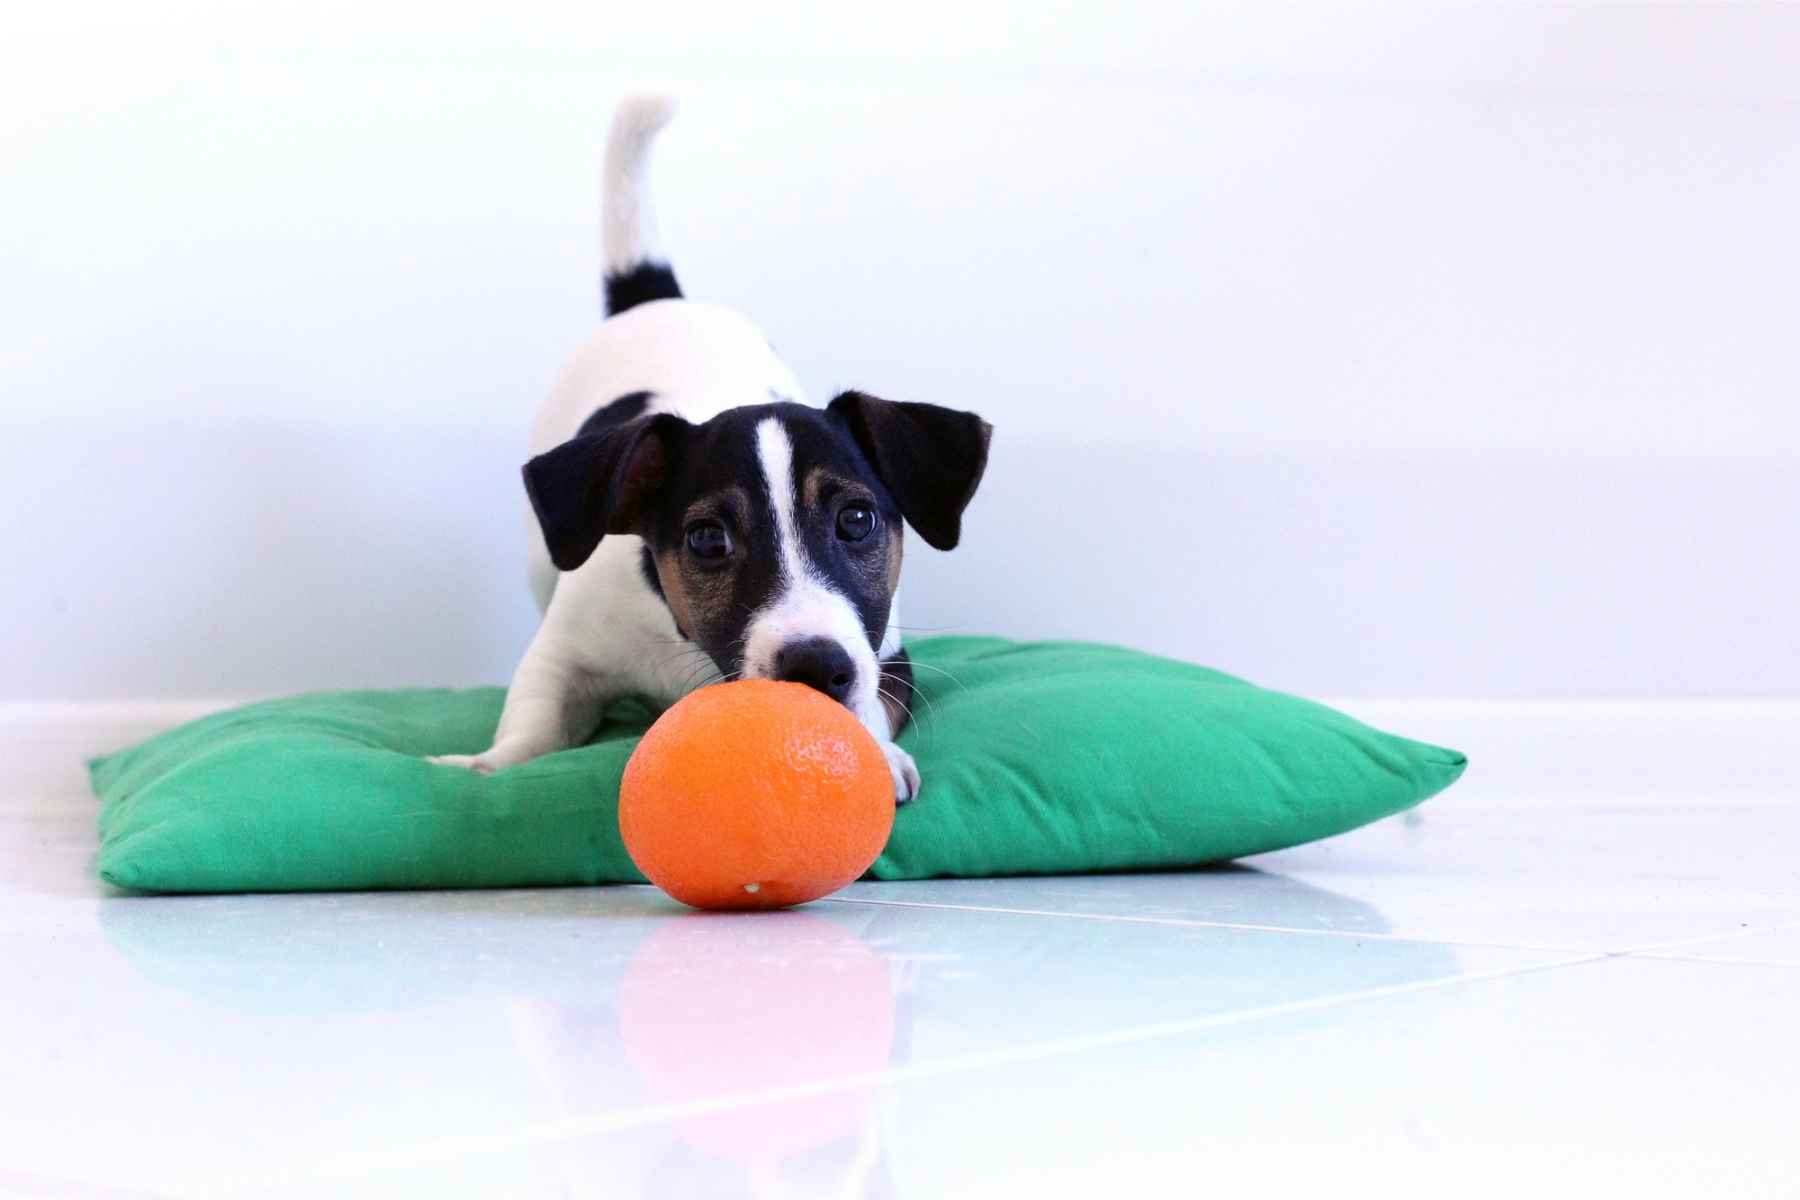 Dog sniffing on a clementine while standing on a green pillow